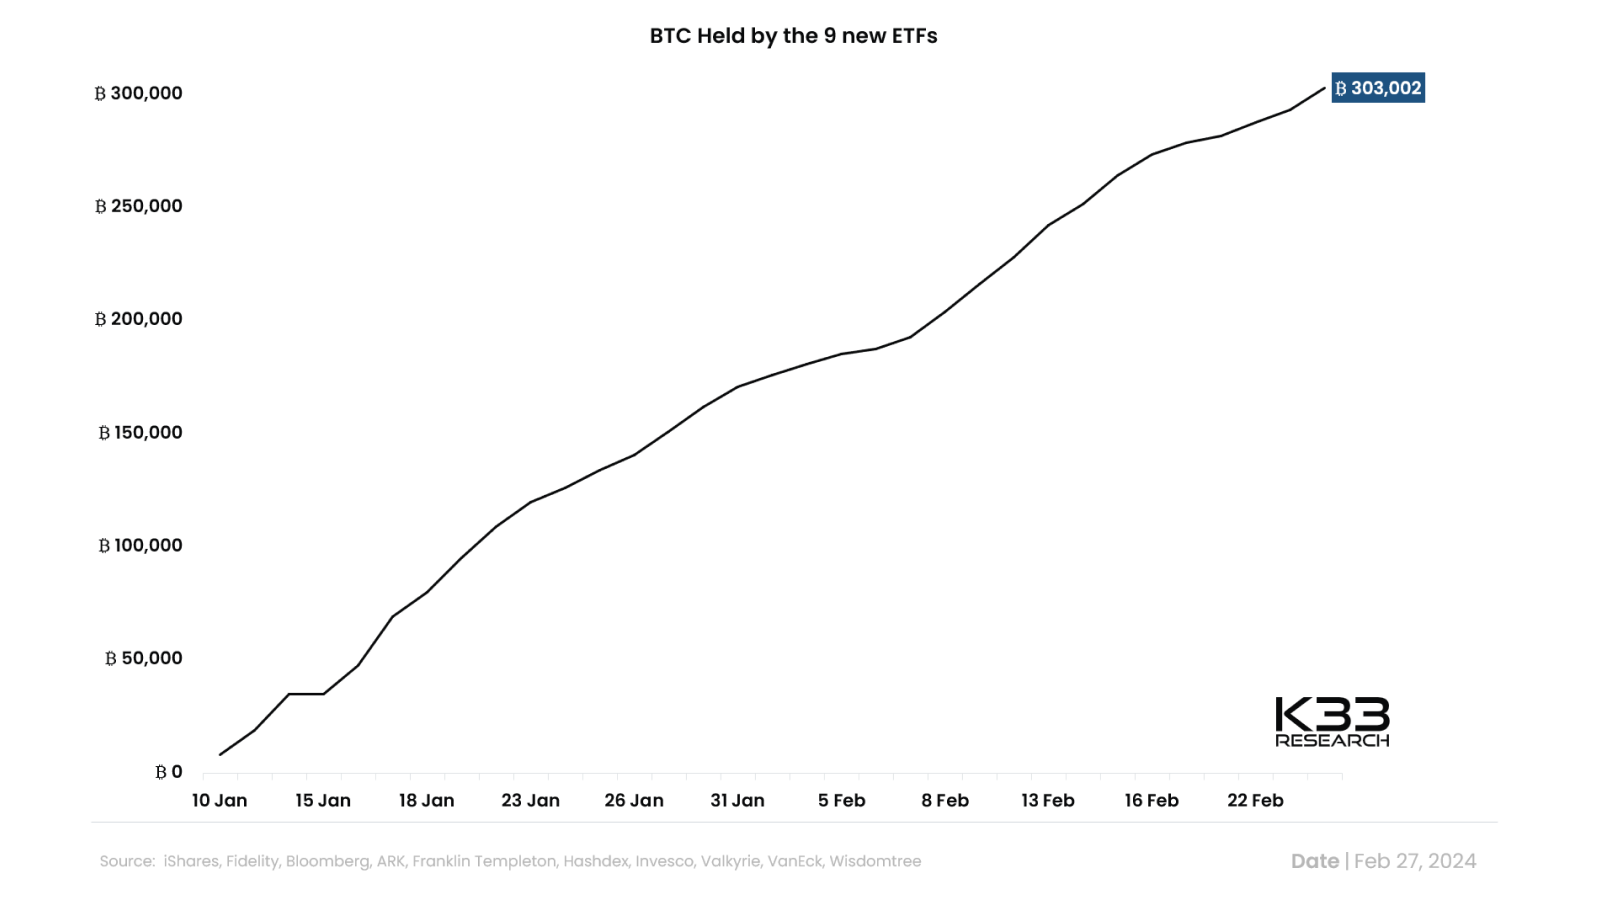 Bitcoin ETFs in U.S. hit record volume of USD$7.6B in one day_K33 Research_March 2025.png